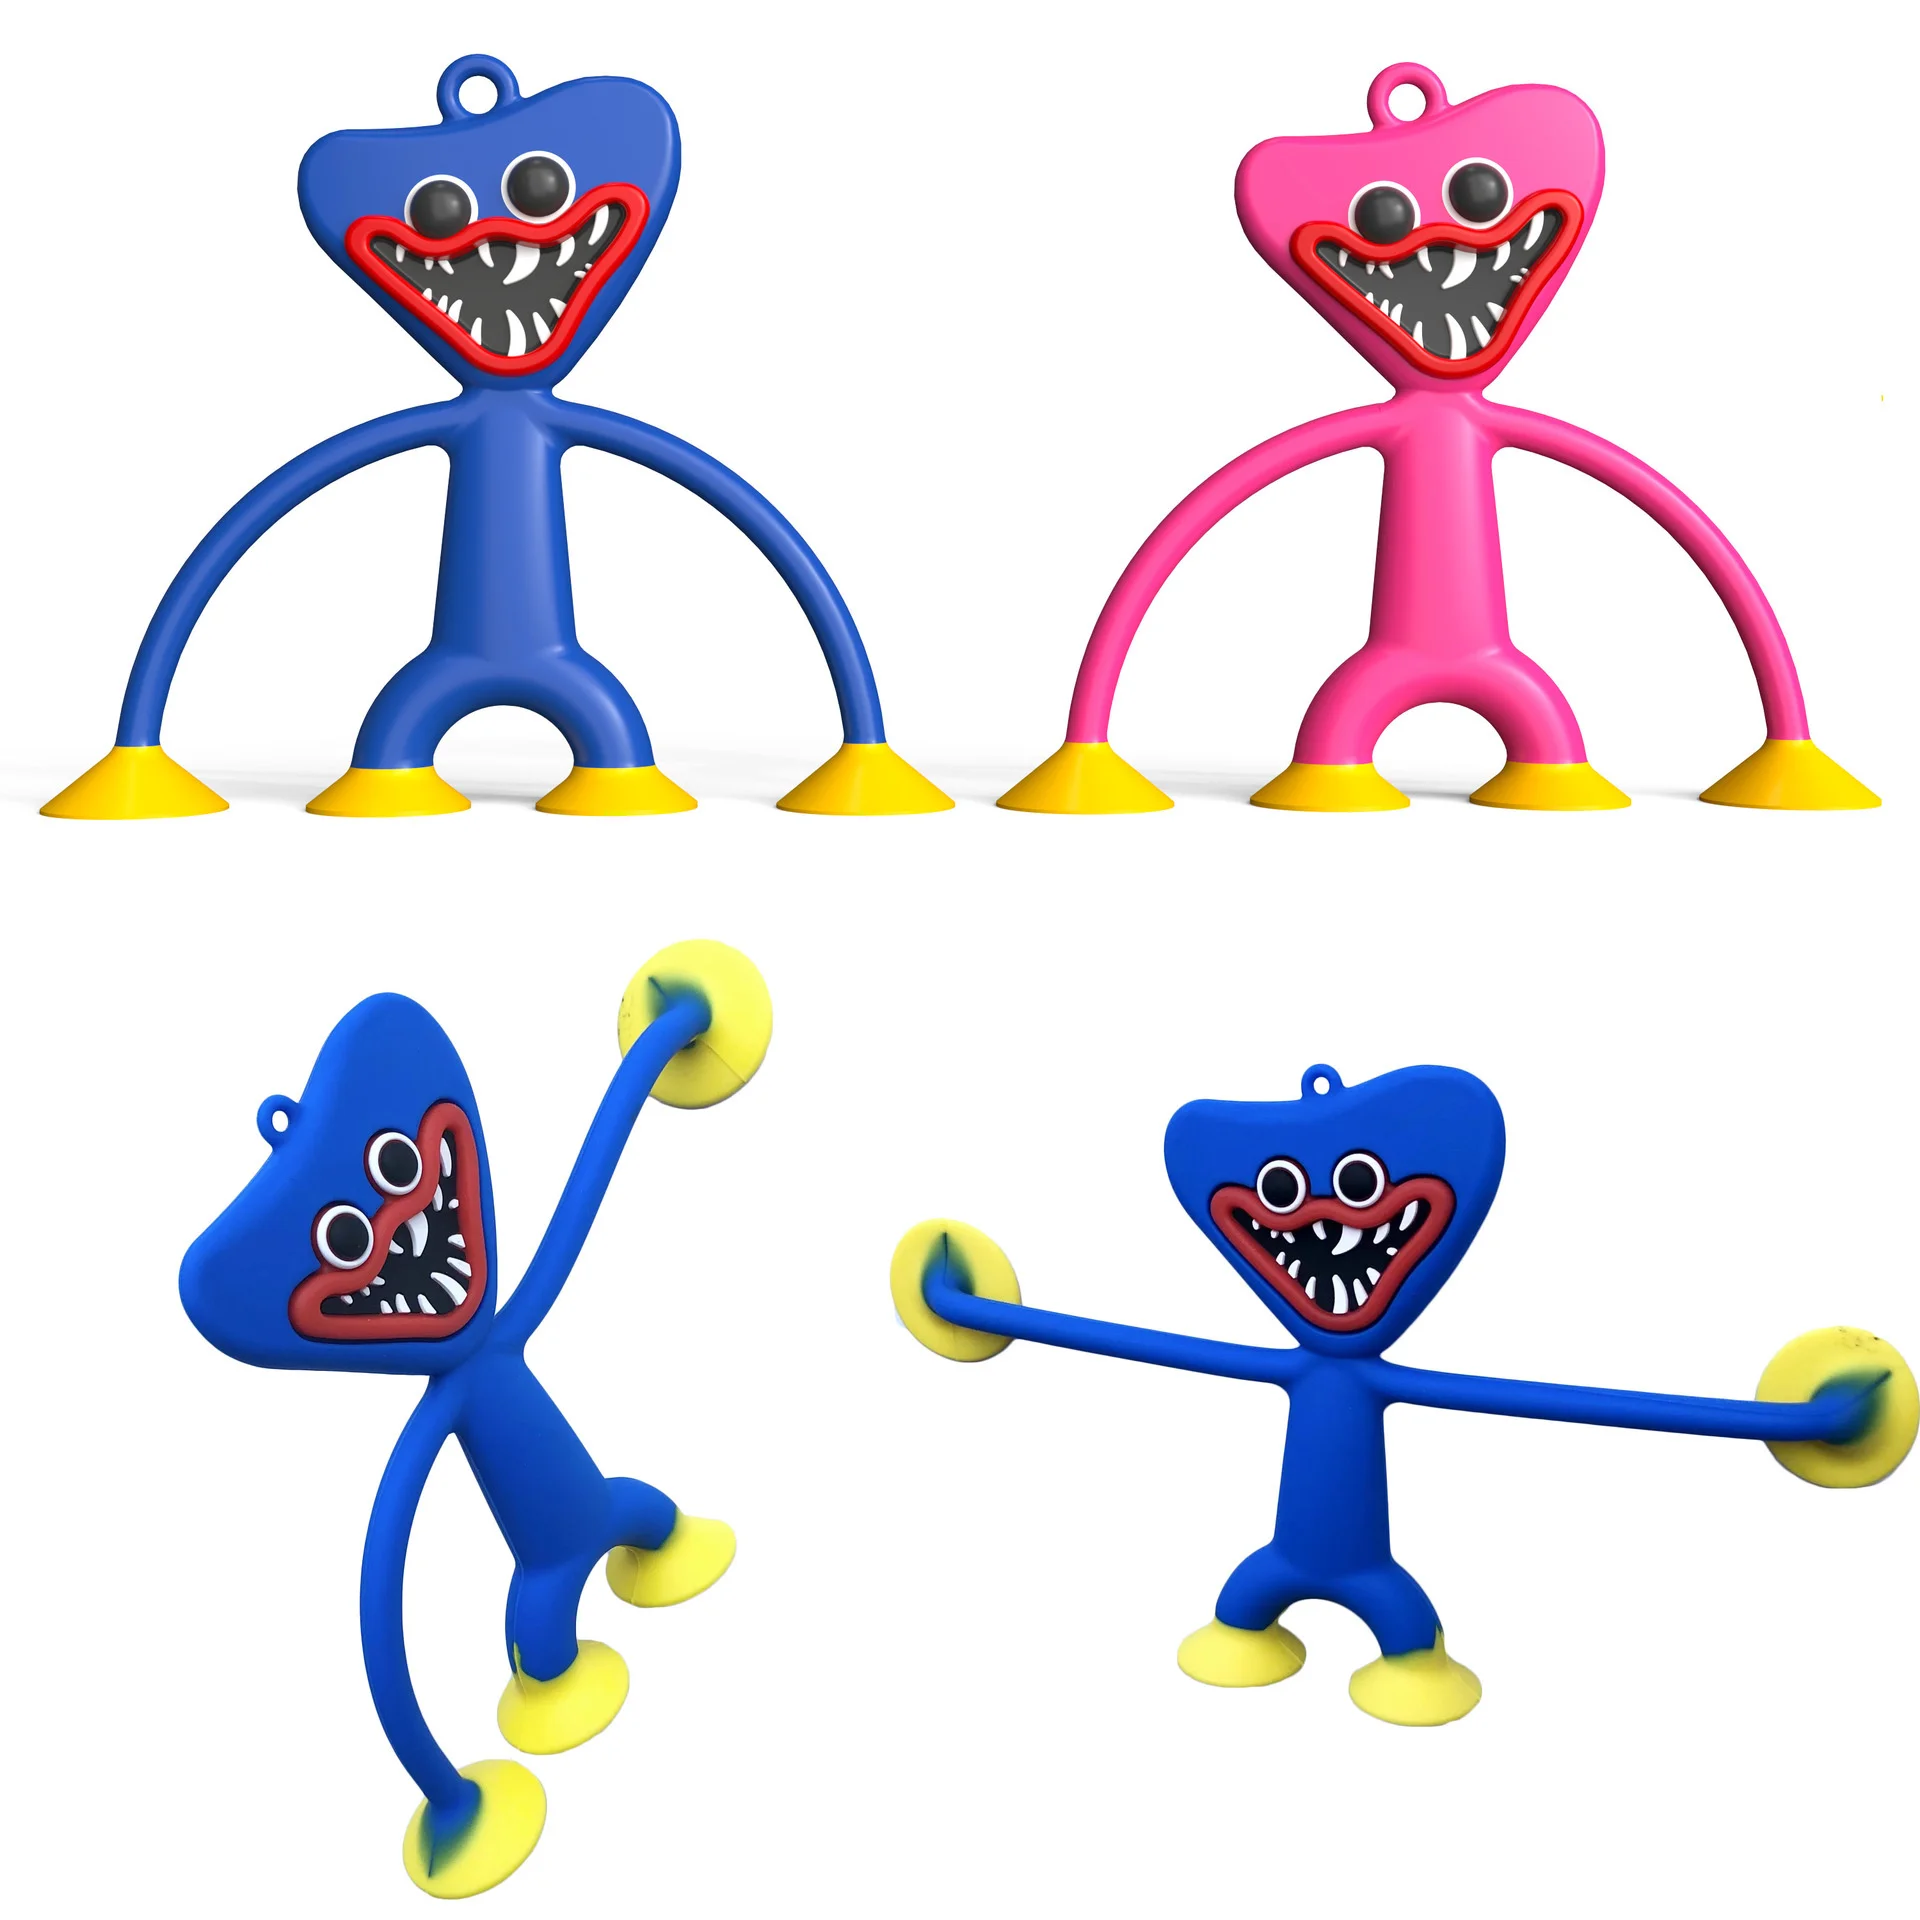 

2022 Huggy Wuggy Pops Poppy Playtime Game Character Sucker Its Toy Hot Scary Toy Peluche Toy Soft Gift Toy Children Christmas